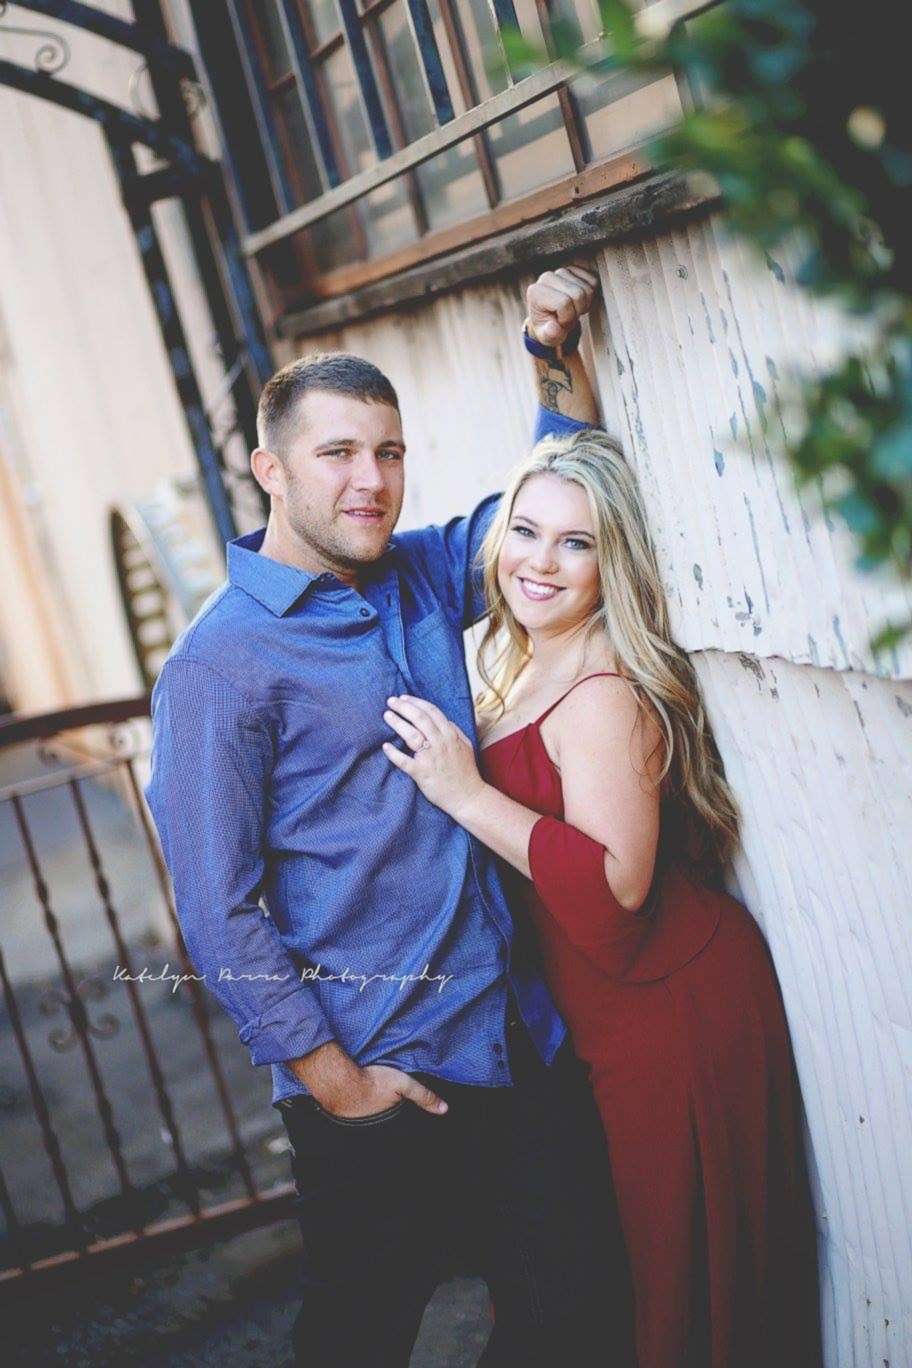 PHOTO: Melvin Riffel is pictured with his wife, Brittney. Melvin Riffel was among those killed in the Ethiopian Airlines crash on March 10, 2019.